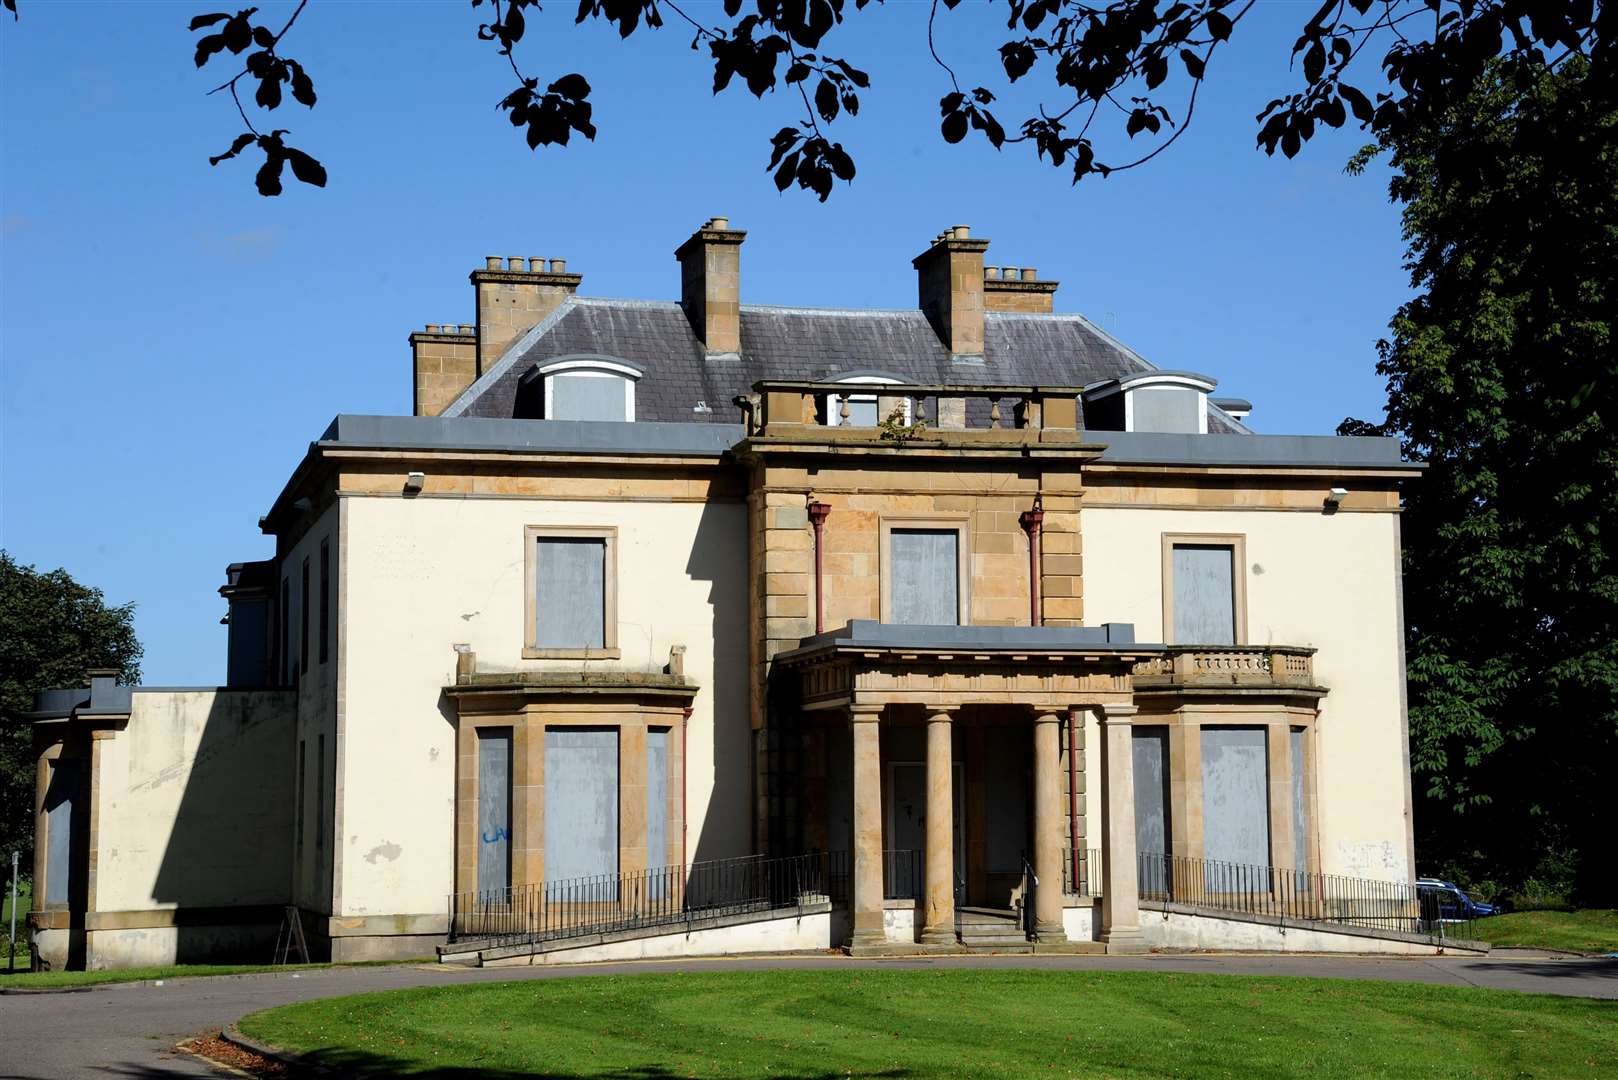 Grant Lodge in Elgin will be turned into a visitor attraction